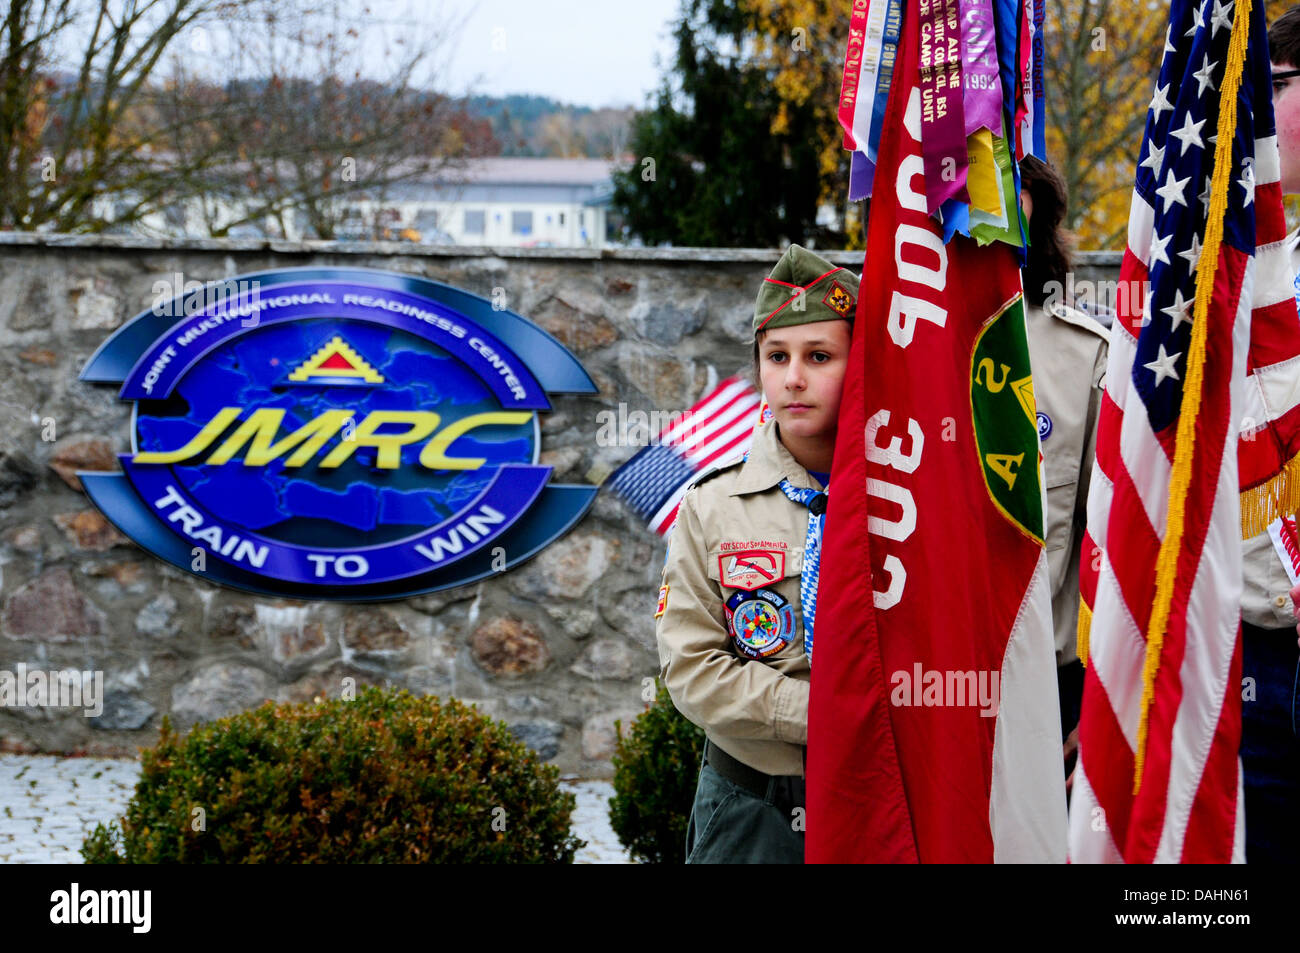 Matthew Sink of Boy Scout troop 303 stands at attention during the Veterans Day ceremony at the Joint Multinational Readiness Center in Hohenfels, Germany, Nov. 8, 2012 121108-A-EL217-008 Stock Photo